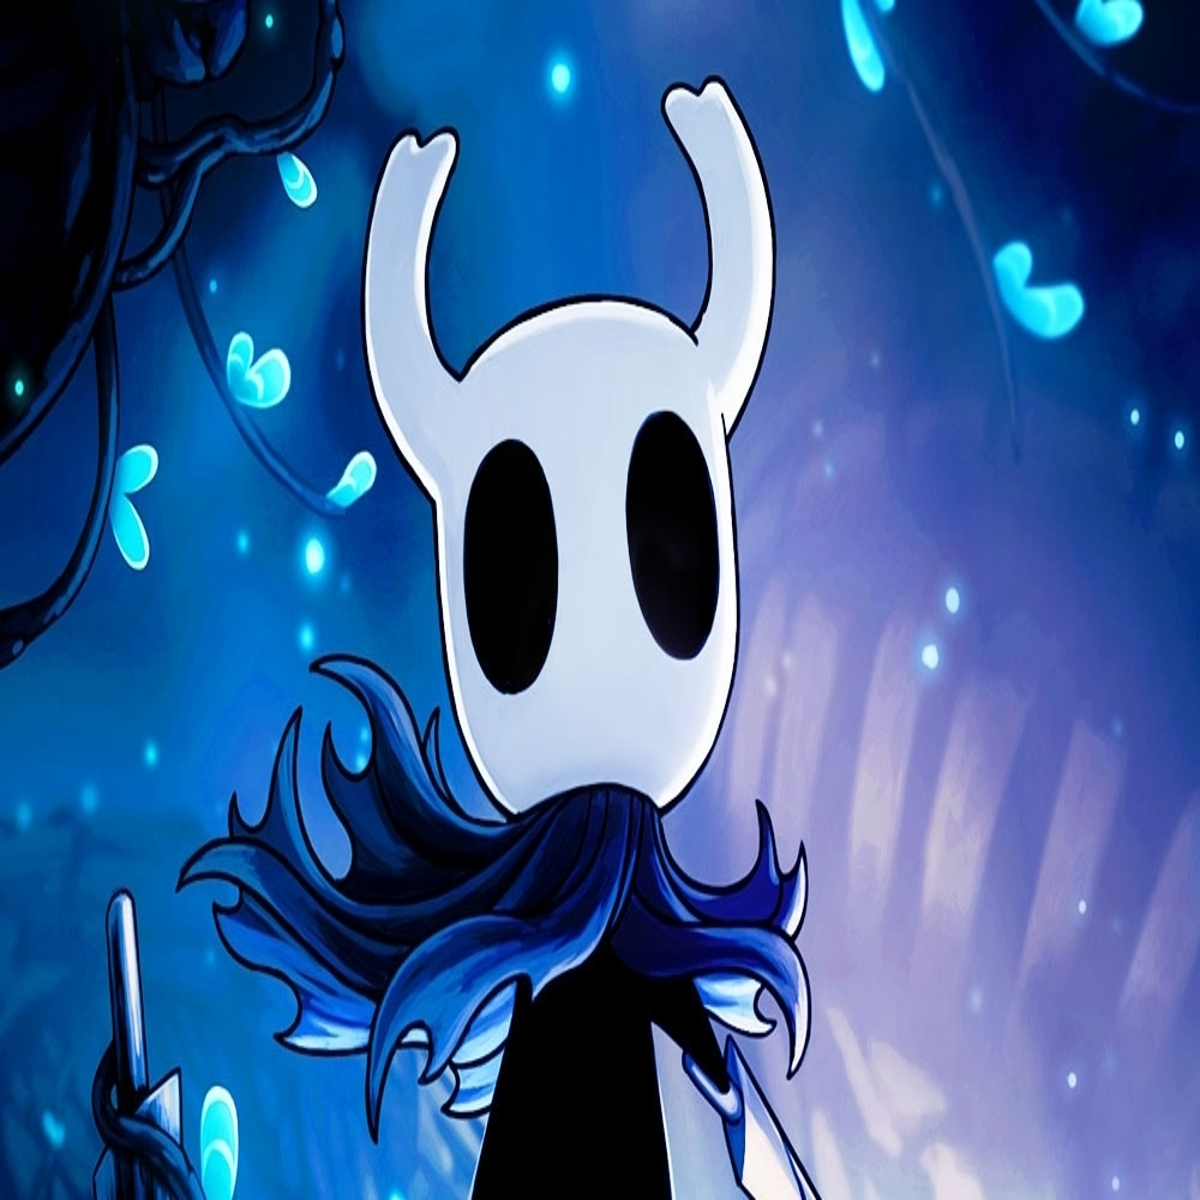 How Hollow Knight's community crafted gibberish into a real language